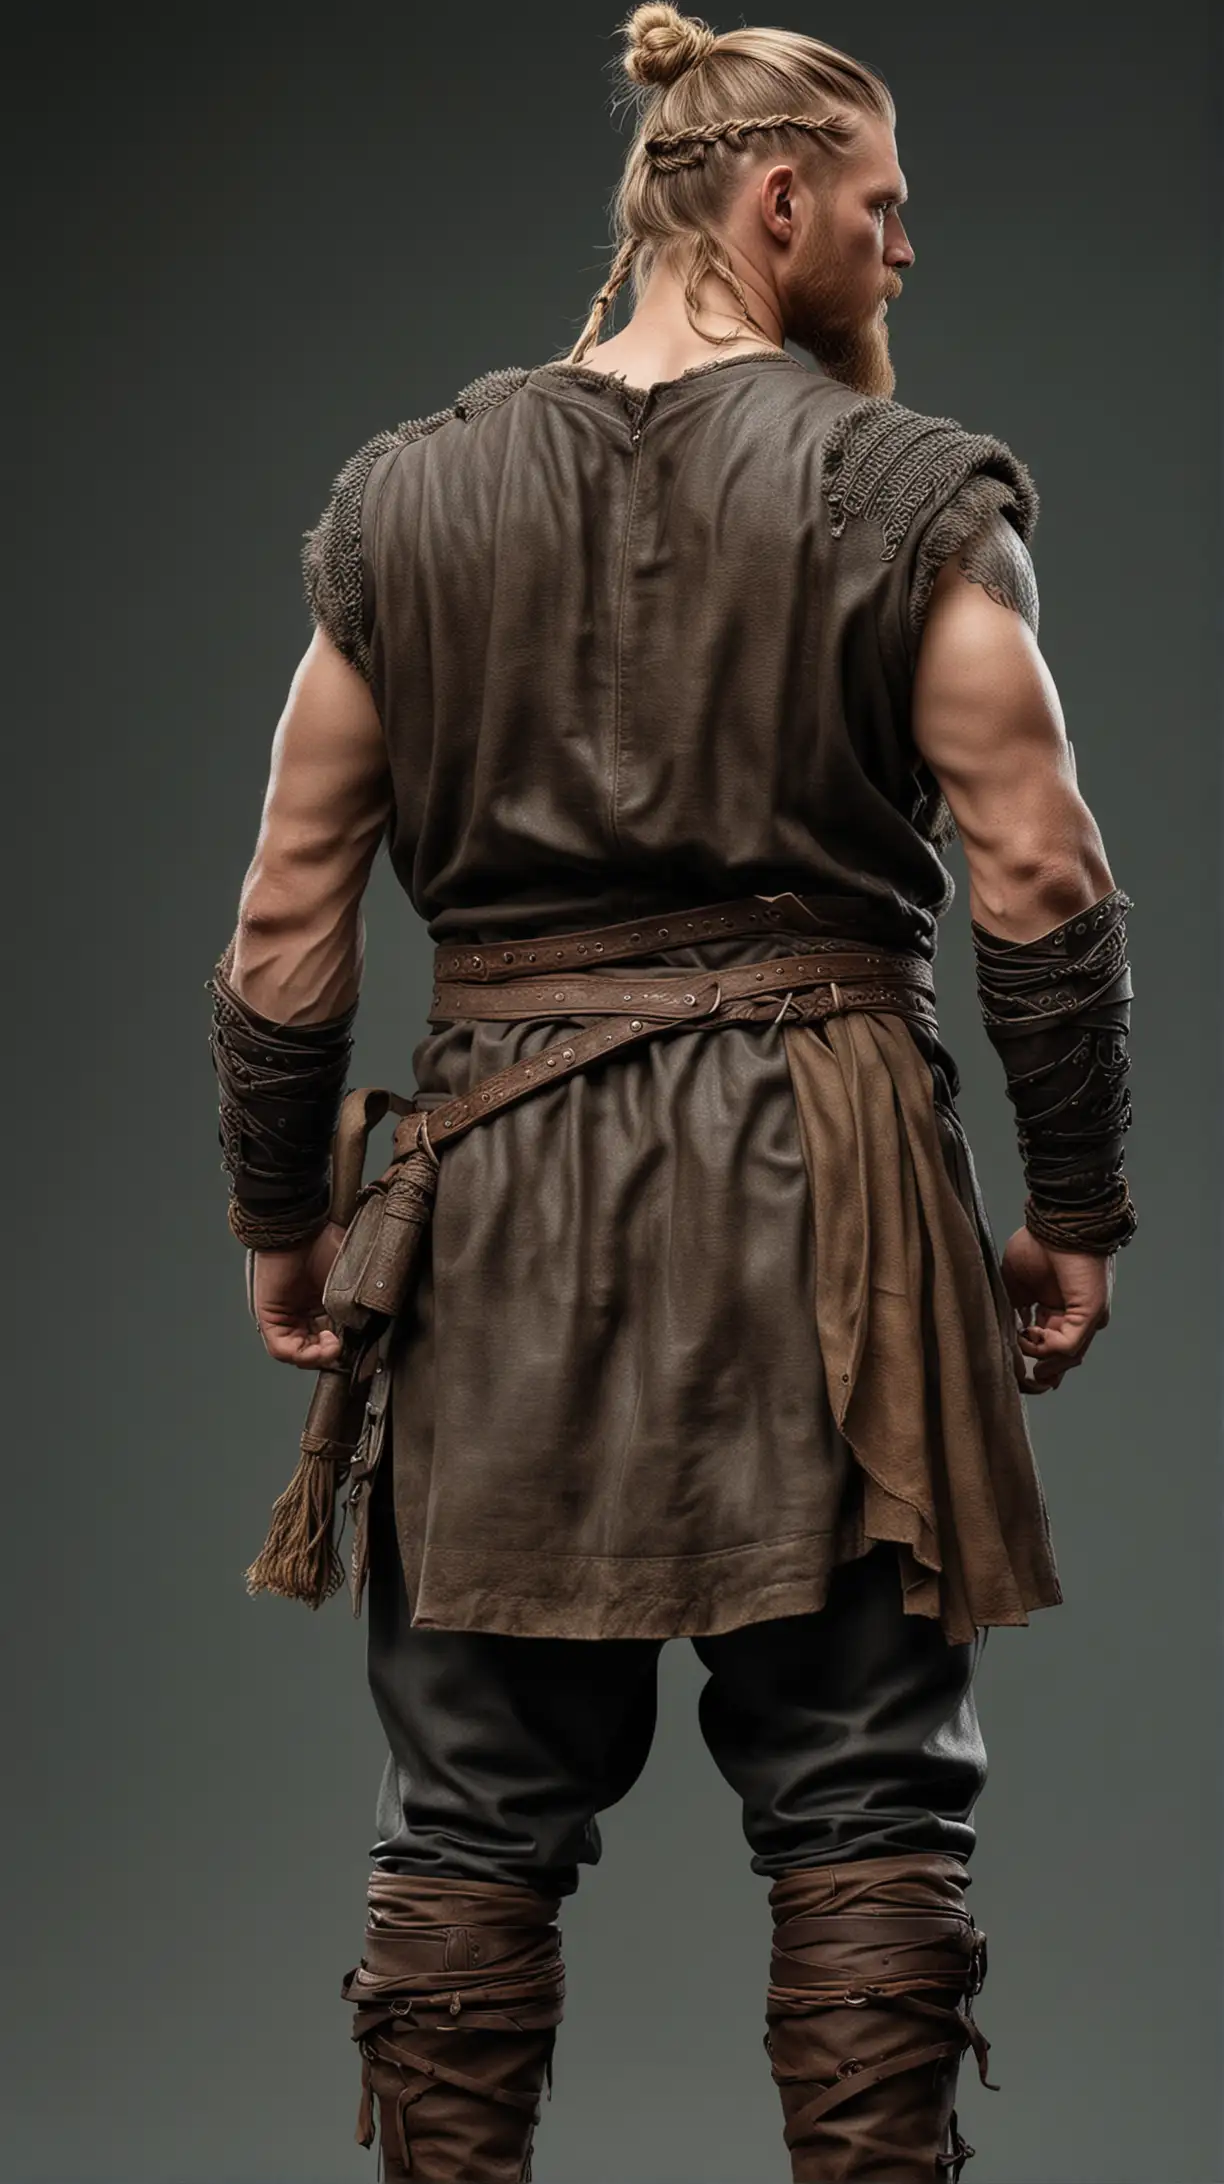 photo taken from behind, showing a big muscular viking man, back view, full body, short shoulder length hair tied in a high knot, viking clothes, leather sleeves, very realistic and detailed, show no side profile or face